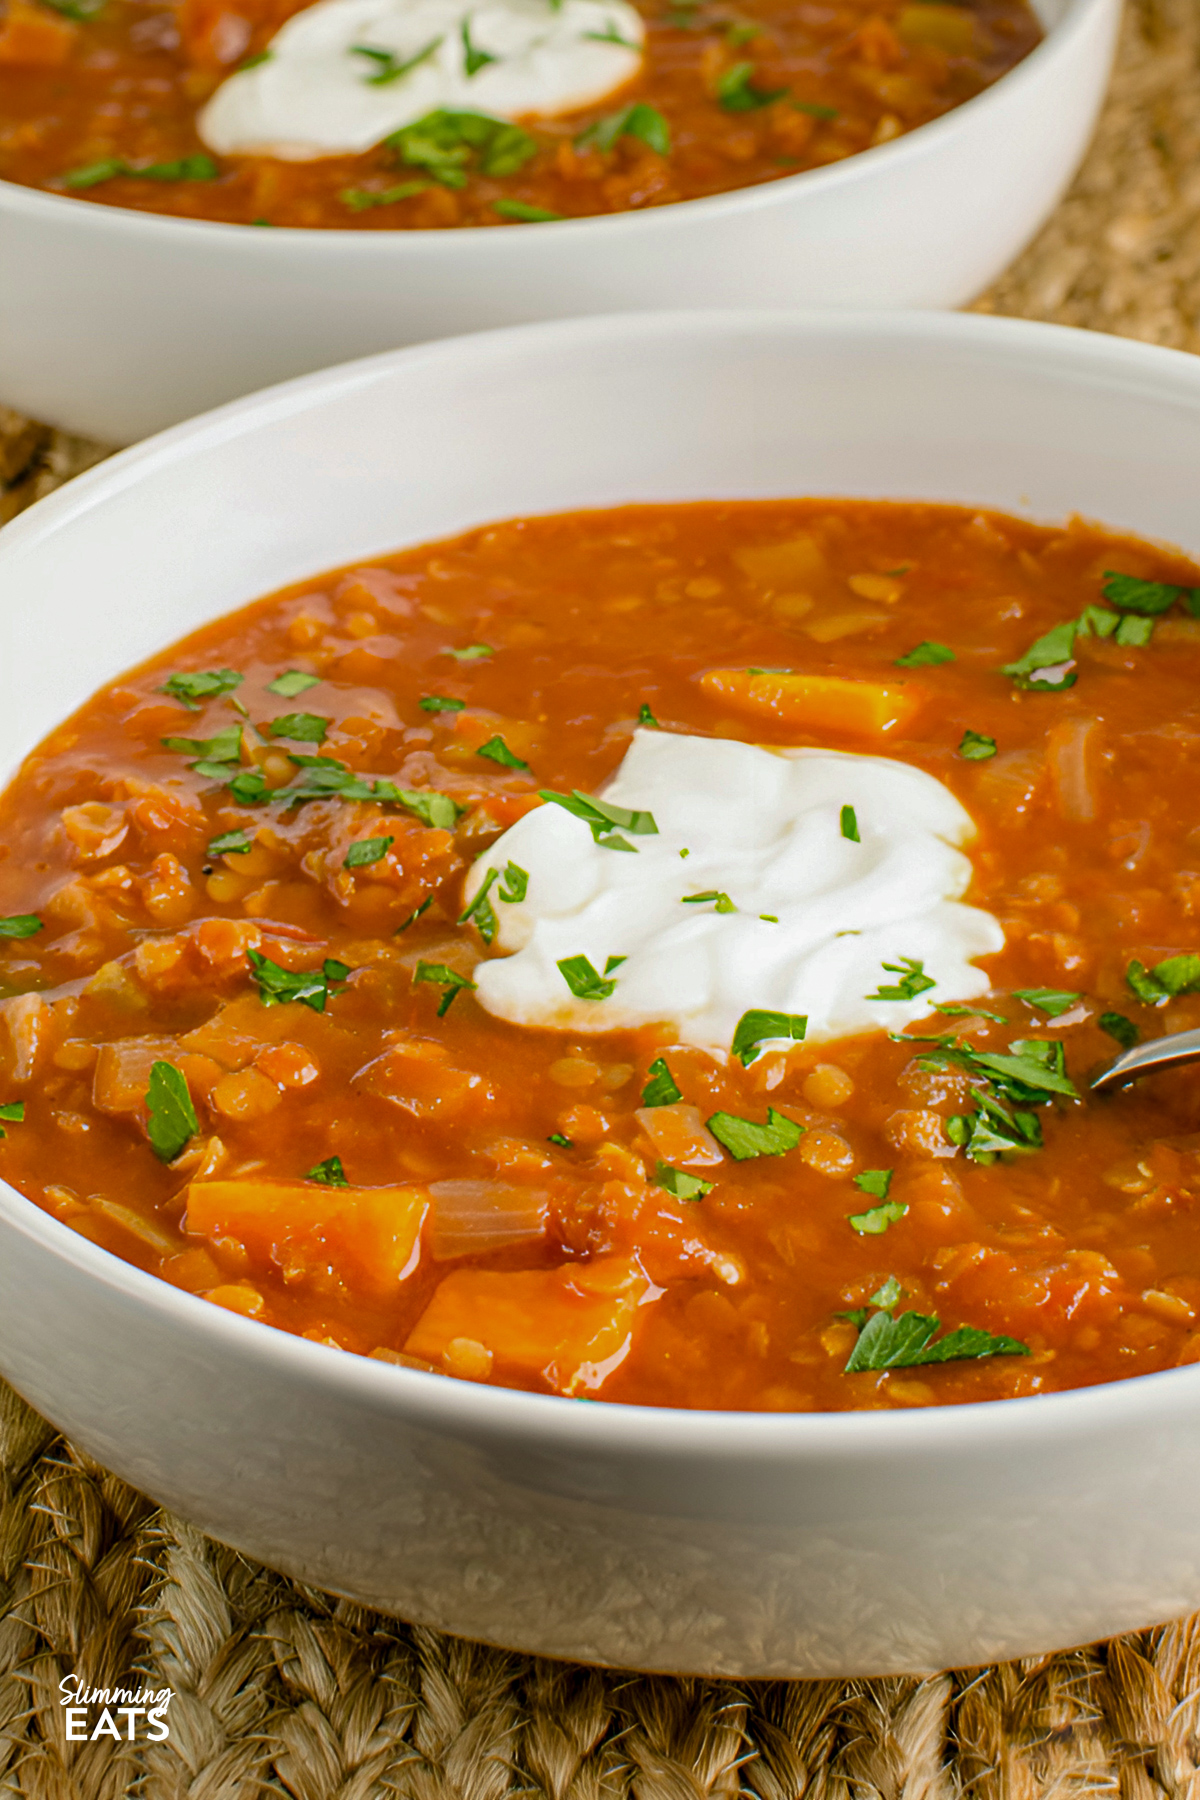 Spicy tomato lentil soup served in cream-colored bowls, topped with a dollop of yogurt and sprinkled with fresh herbs.